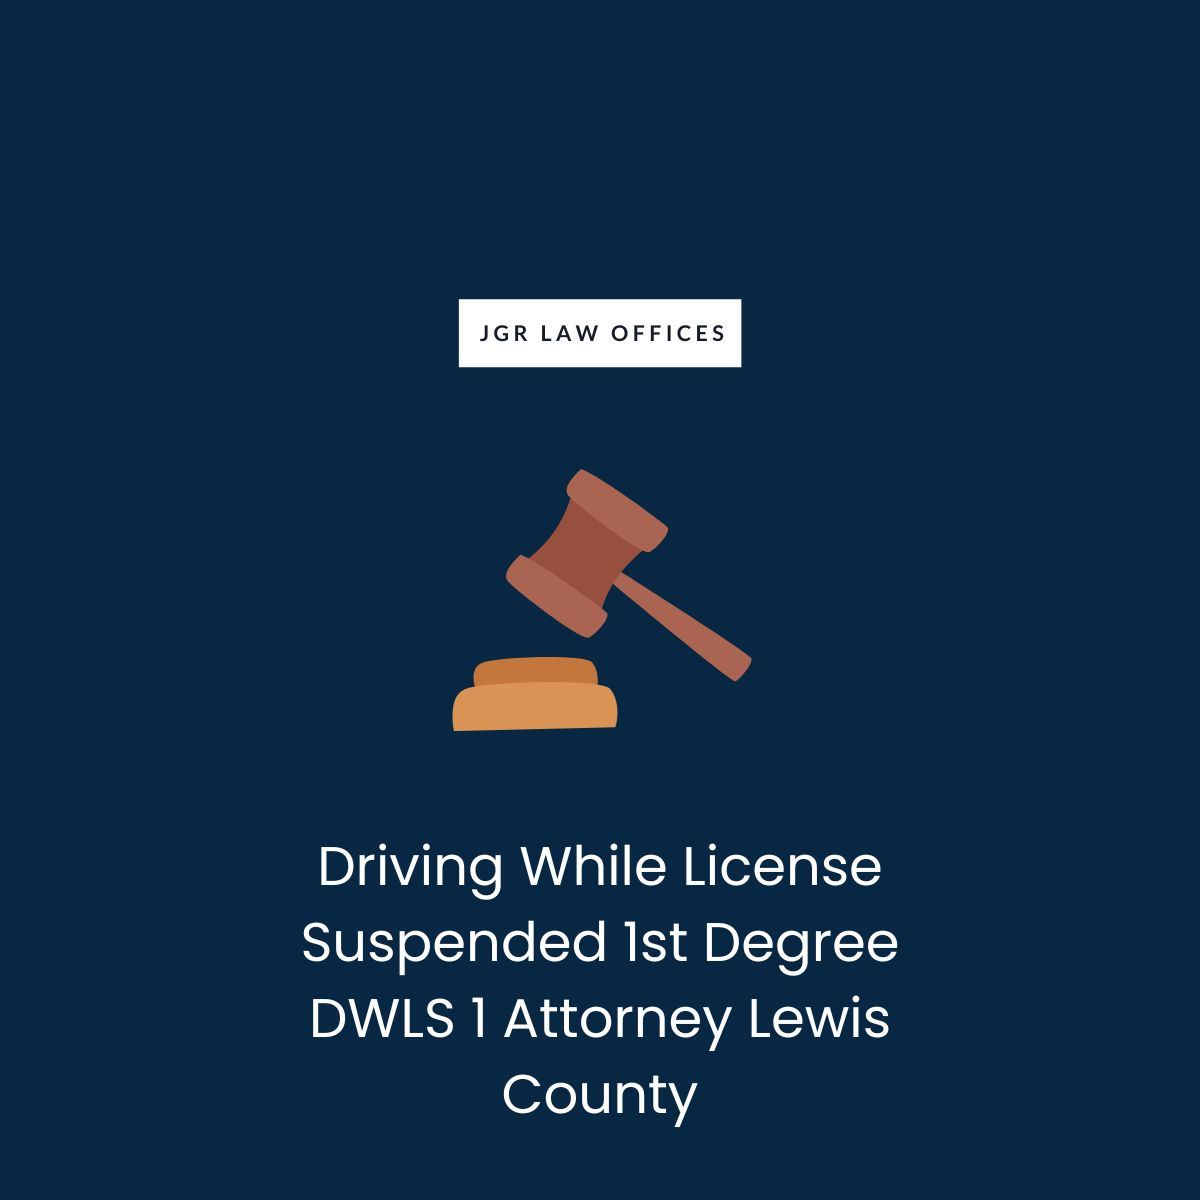 Driving While License Suspended 1st Degree DWLS 1 Attorney Lewis County